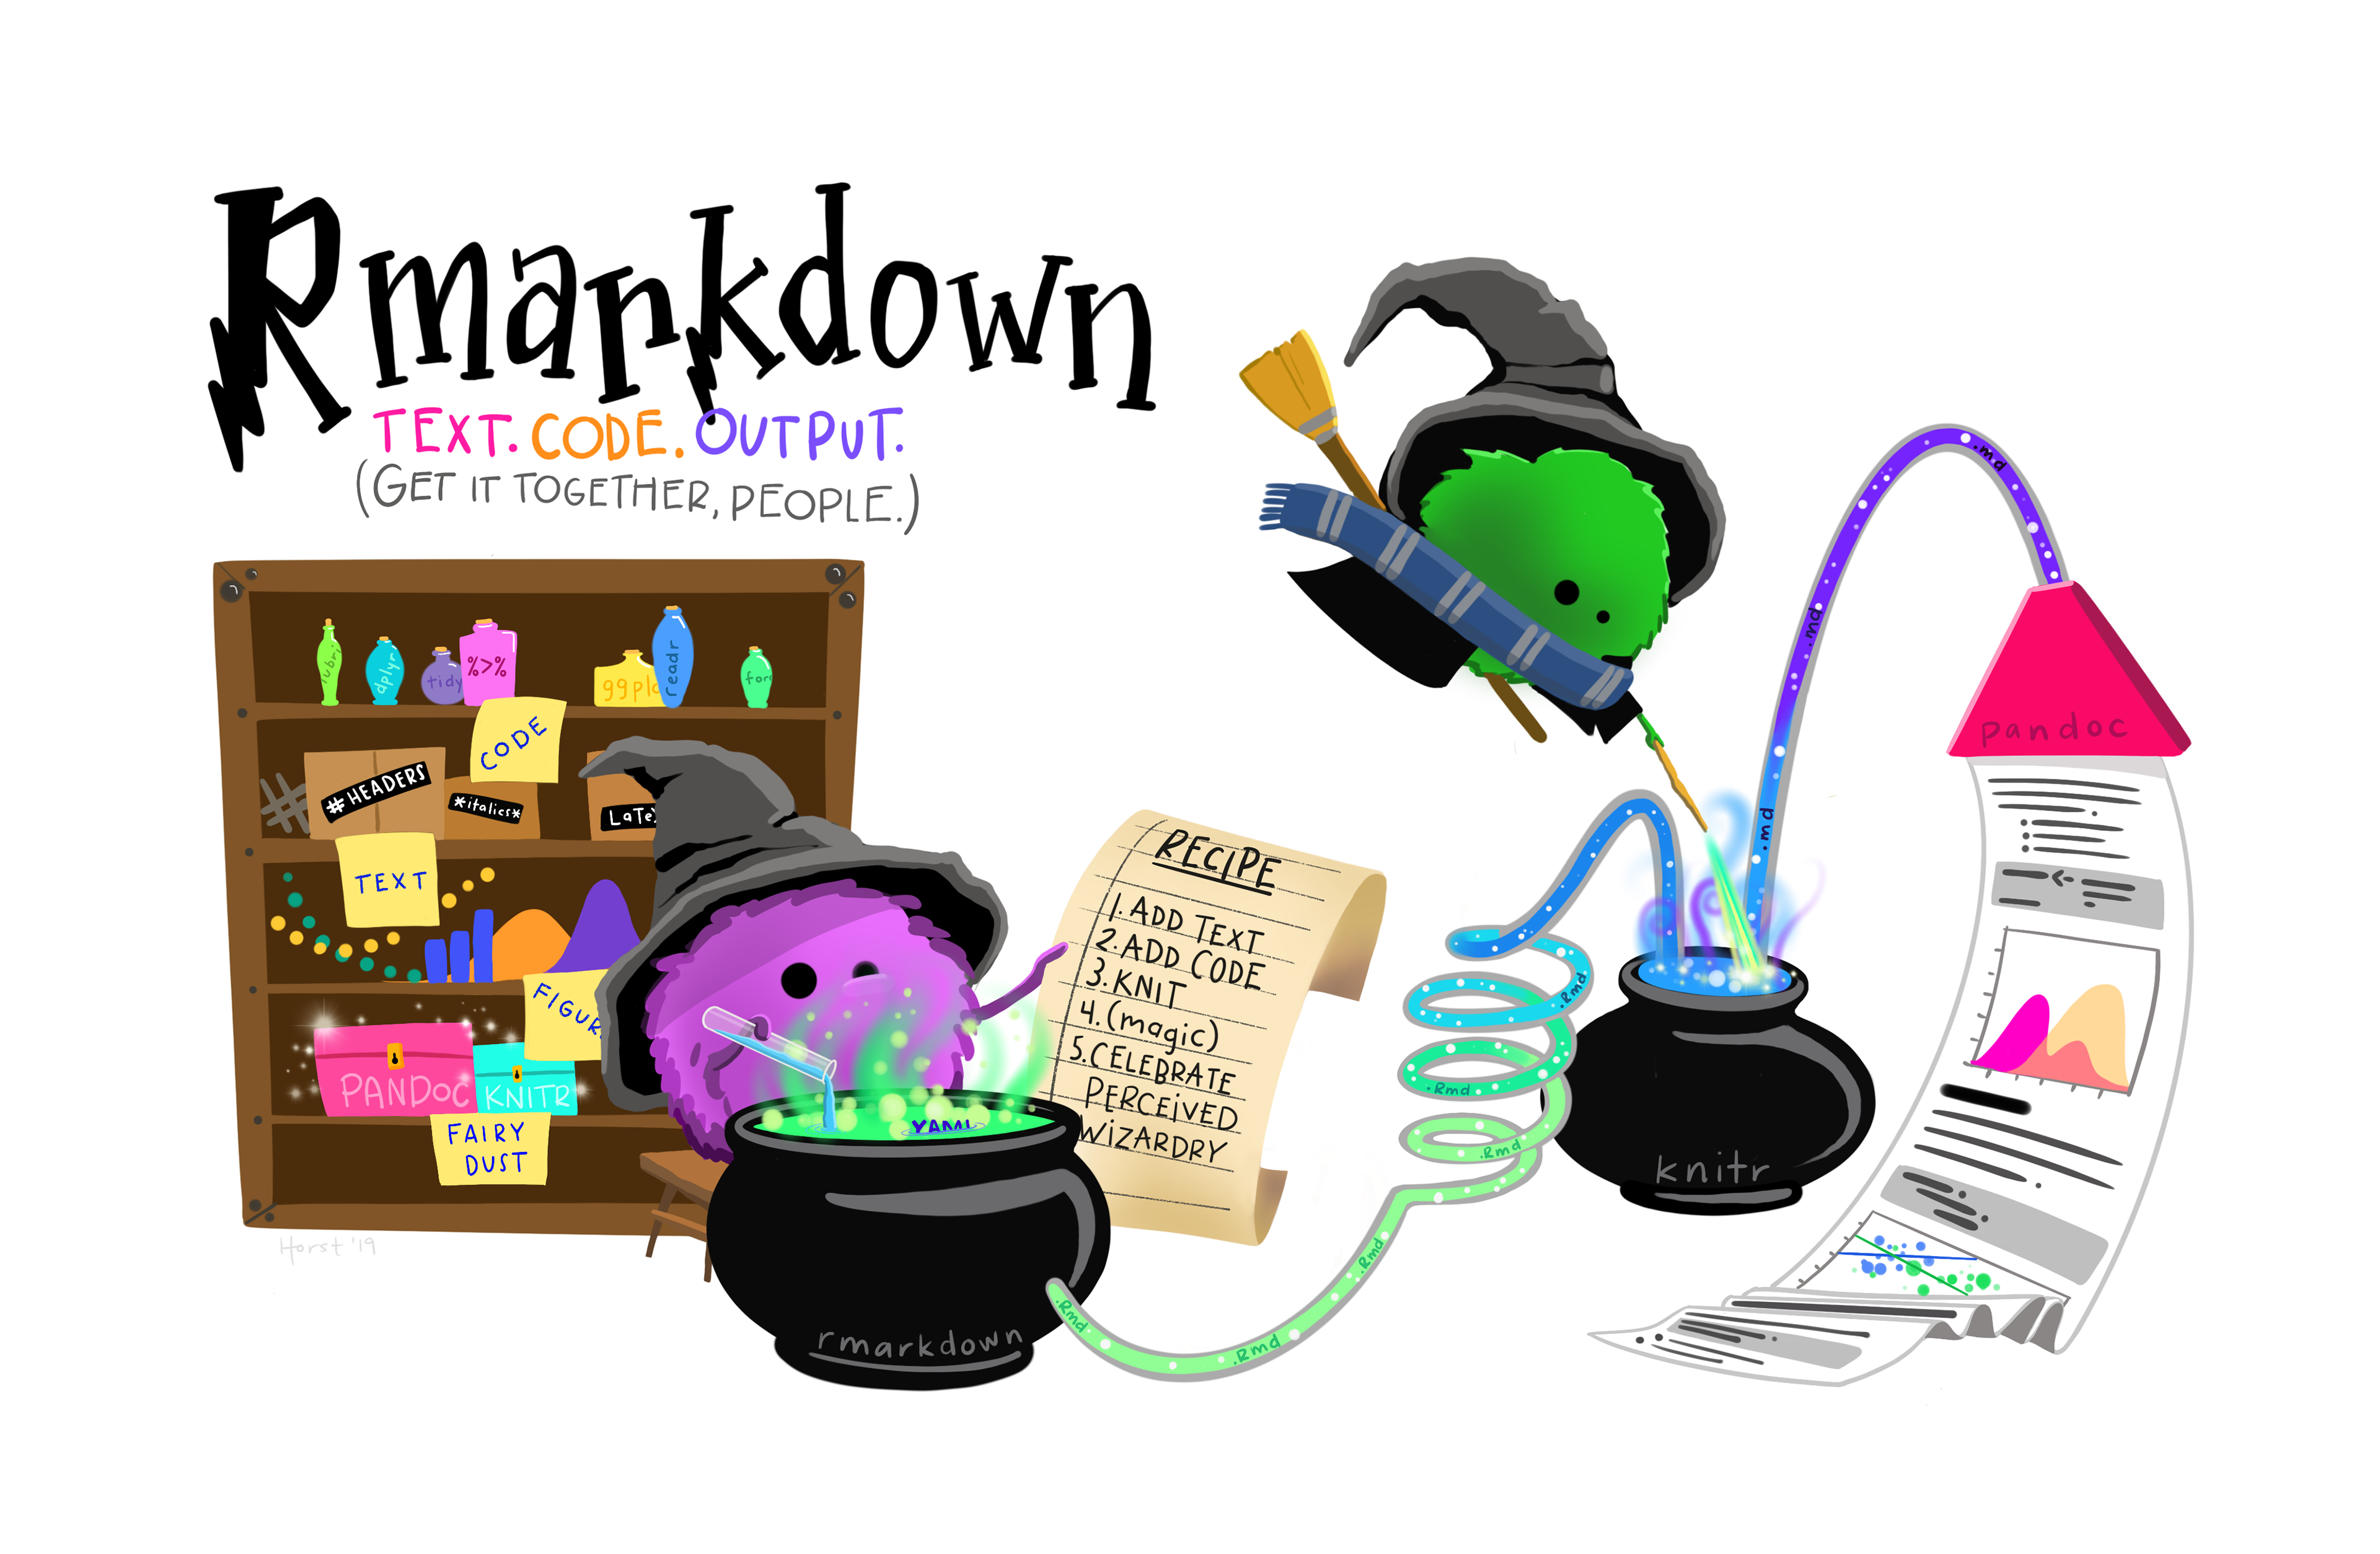 Two fuzzy round monsters dressed as wizards, working together to brew different things together from a pantry (code, text, figures, etc.) in a cauldron labeled “R Markdown”. The monster wizard at the cauldron is reading a recipe that includes steps “1. Add text. 2. Add code. 3. Knit. 4. (magic) 5. Celebrate perceived wizardry.” The R Markdown potion then travels through a tube, and is converted to markdown by a monster on a broom with a magic wand, and eventually converted to an output by pandoc. Stylized text (in a font similar to Harry Potter) reads “R Markdown. Text. Code. Output. Get it together, people.”